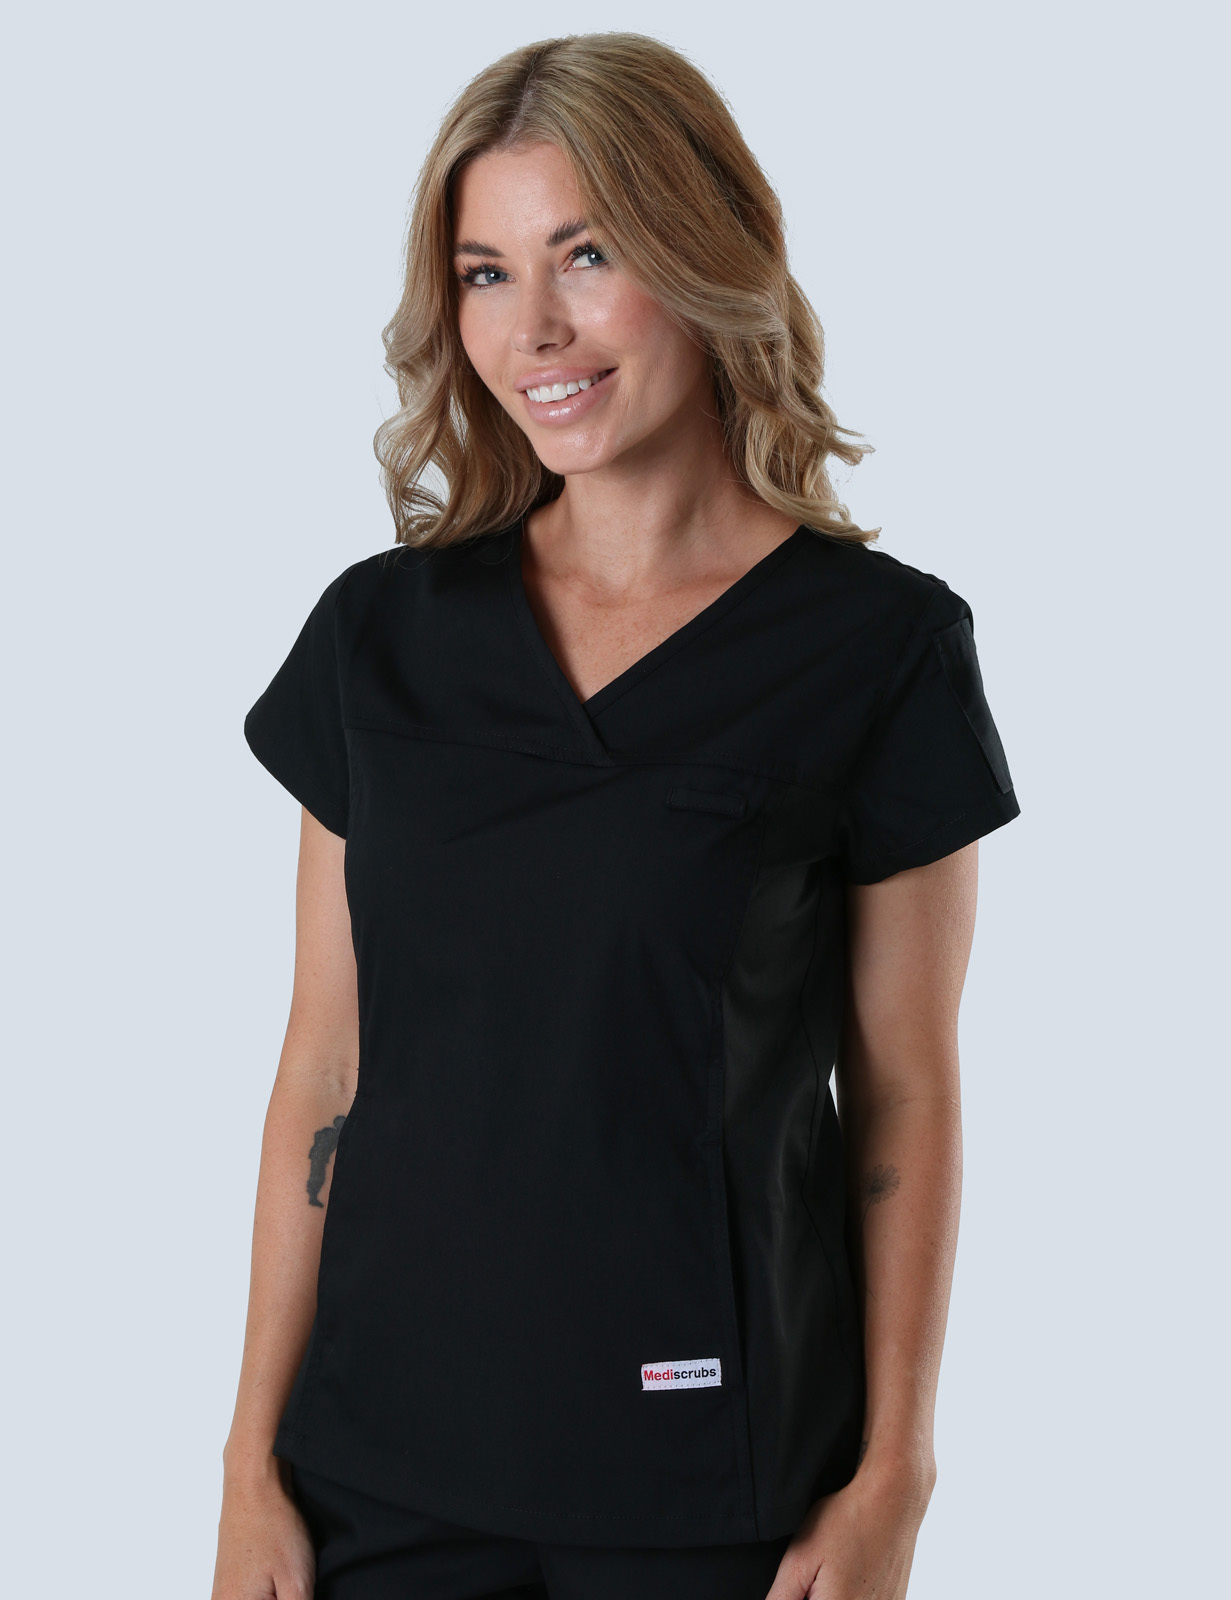 RBWH - Grantley Stable Neonatal (Women's Fit Spandex Scrub Top and Cargo Pants in Black incl Logos)